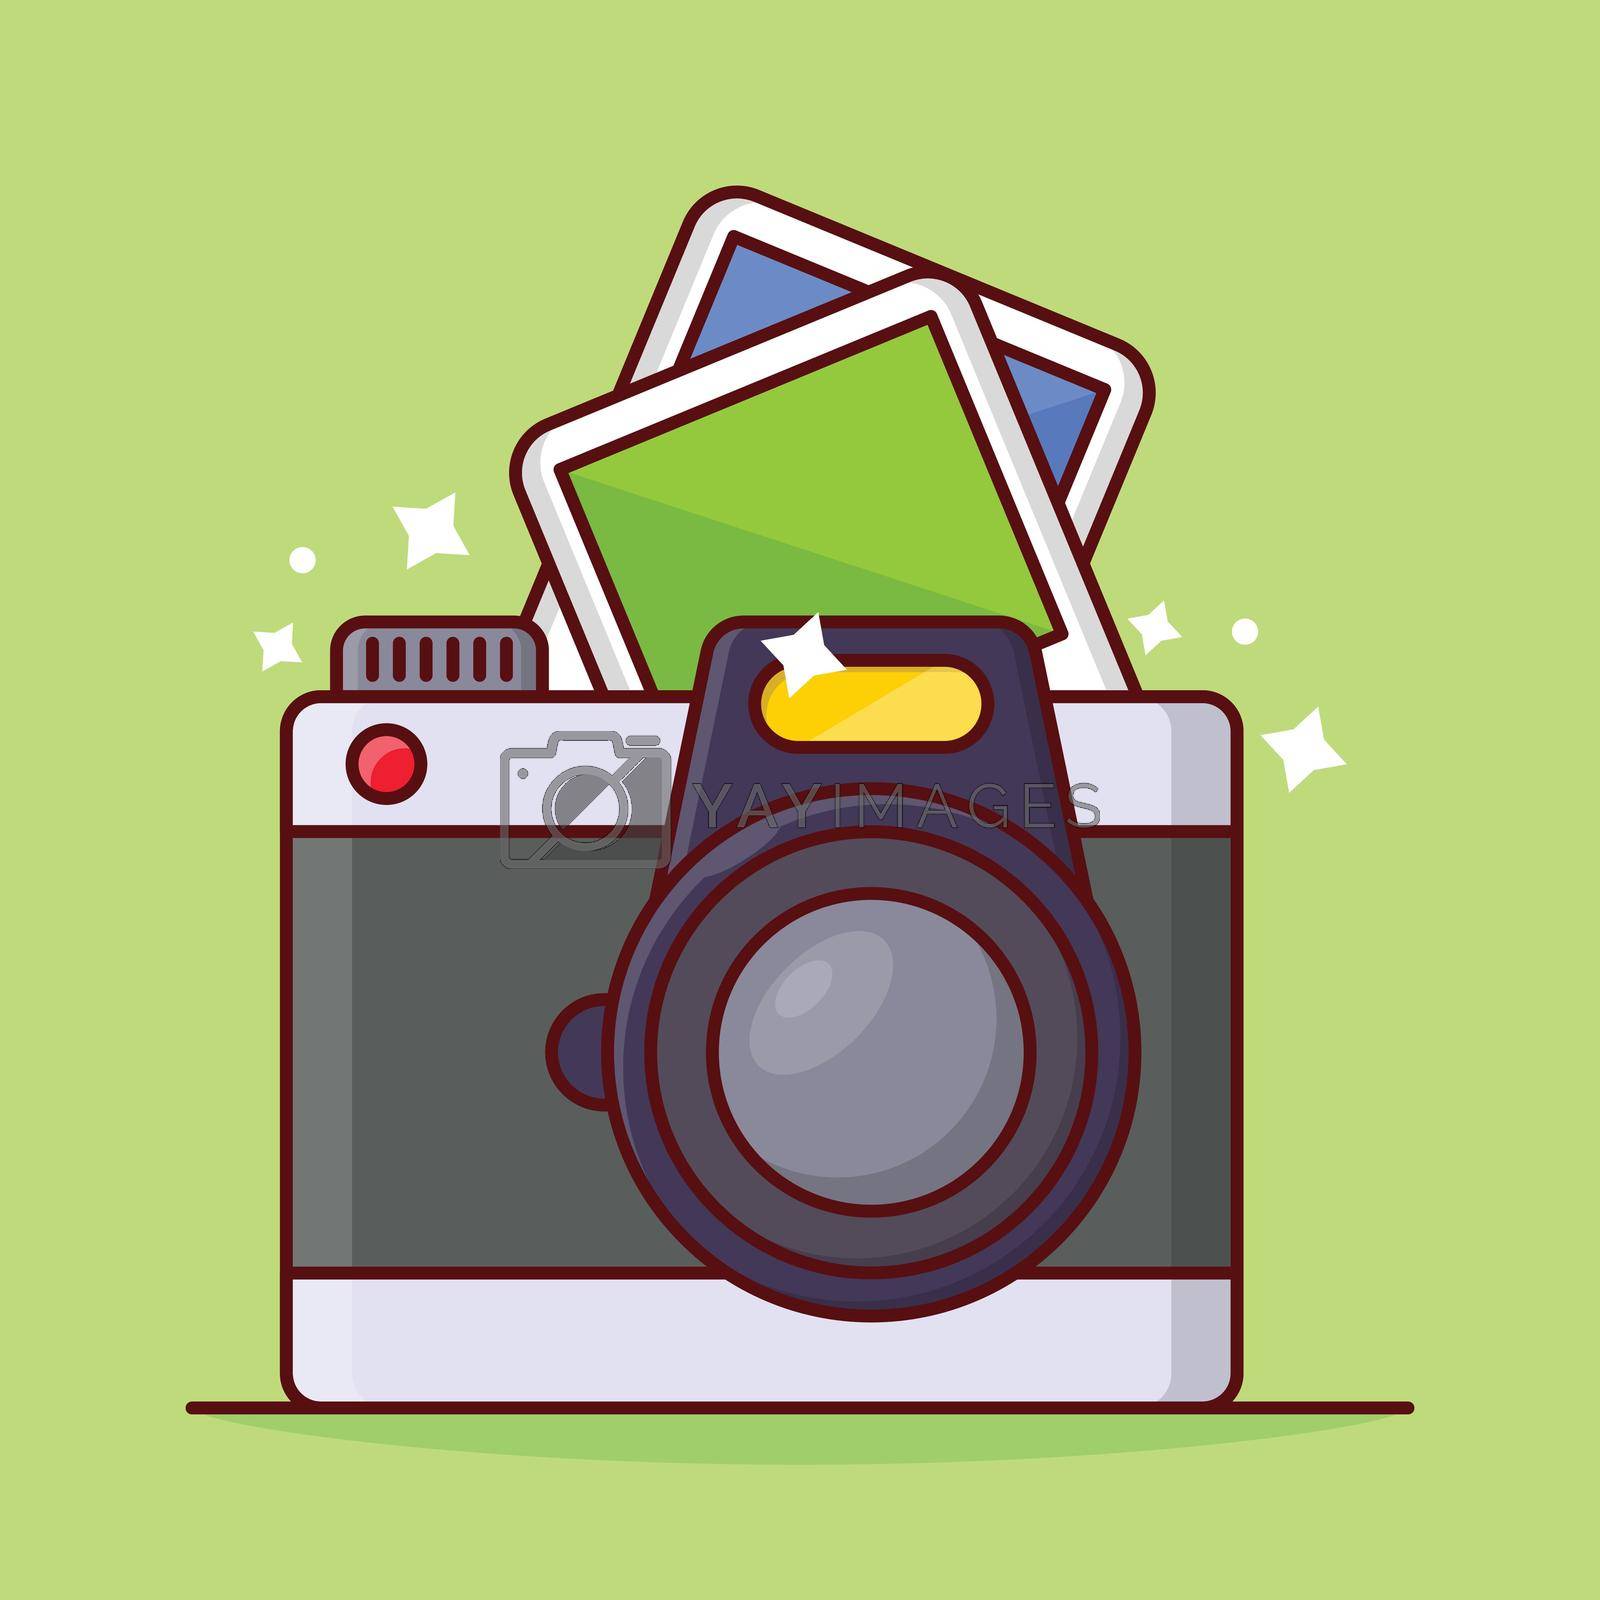 Royalty free image of camera by FlaticonsDesign